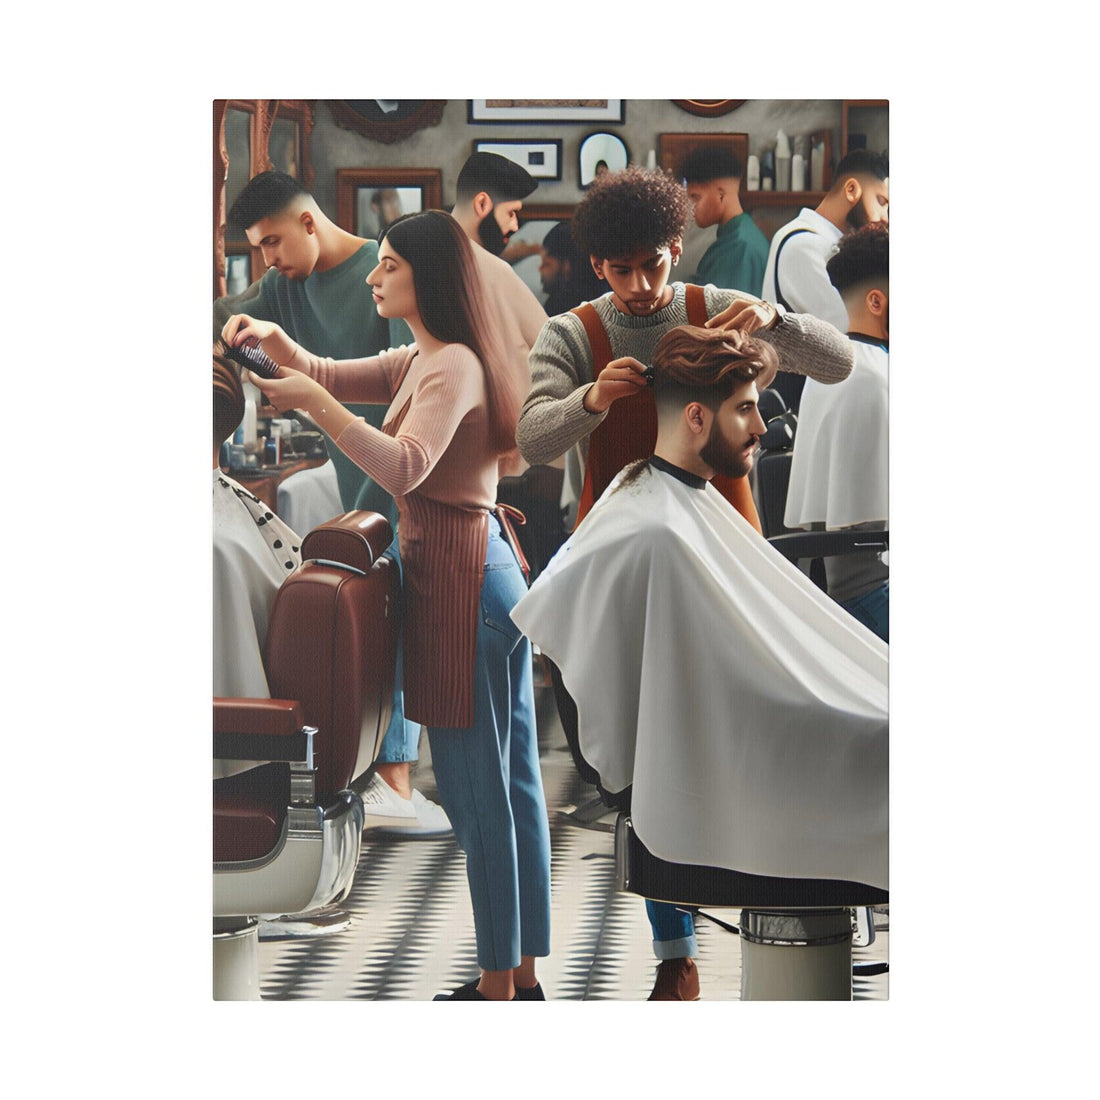 "Clip & Trim: Capturing the Soul of the Barber Shop Canvas Wall Art" - The Alice Gallery